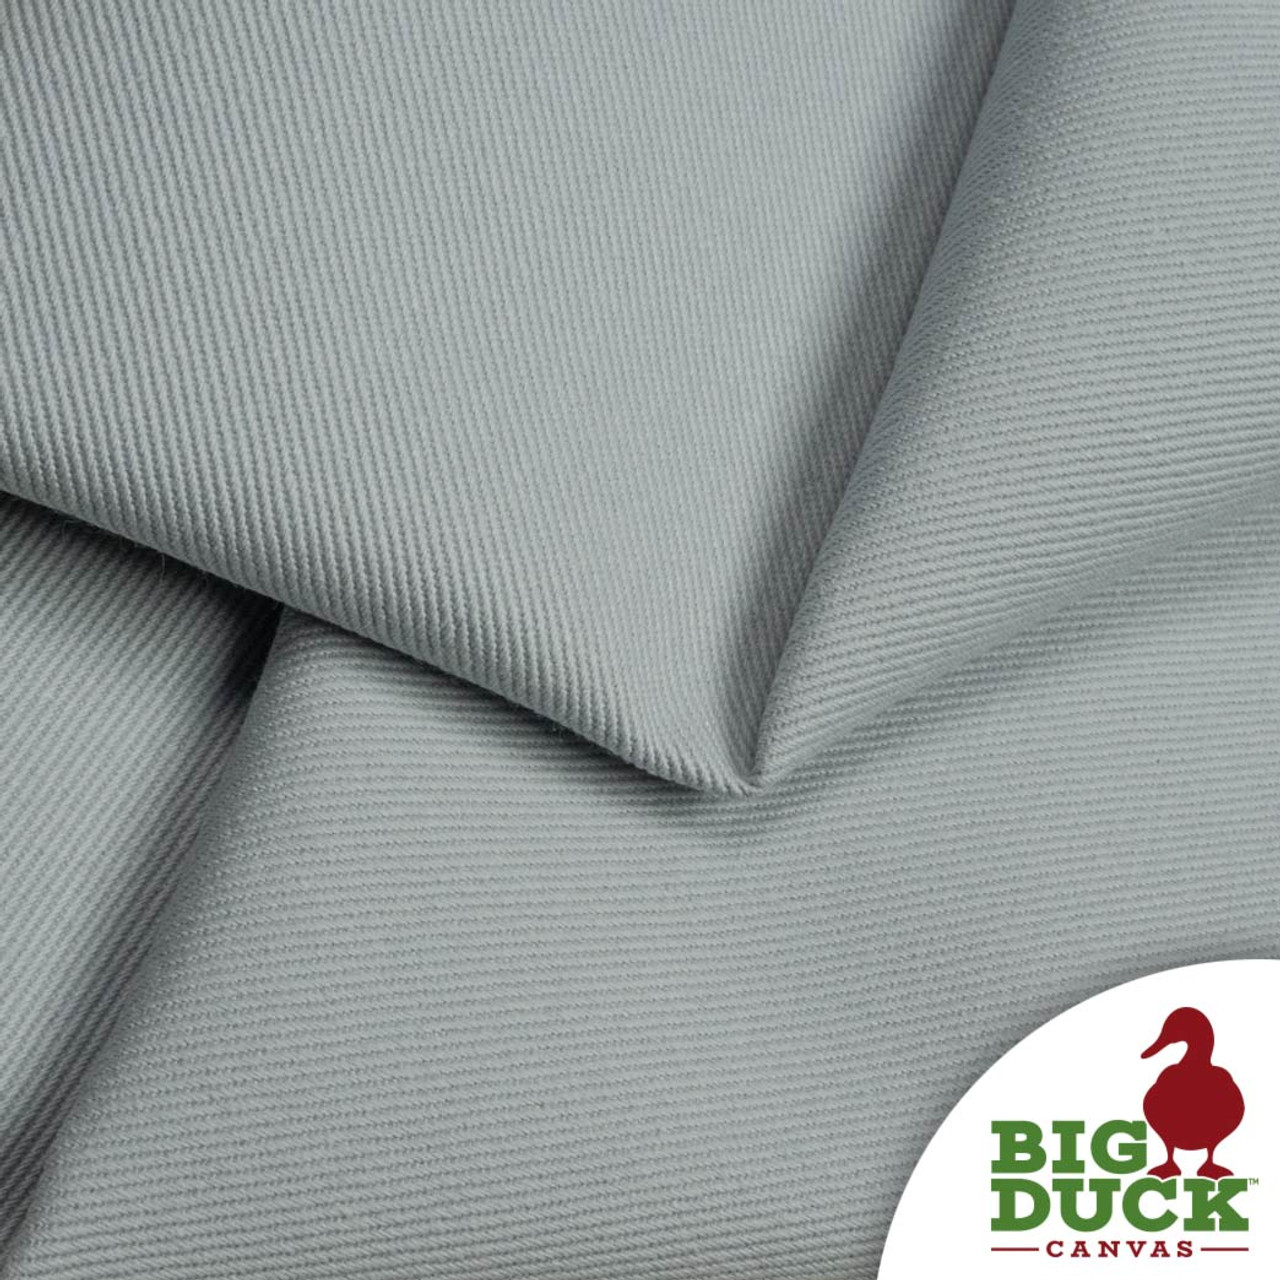 Light Gray 1 mil PUL Fabric - Made in the USA